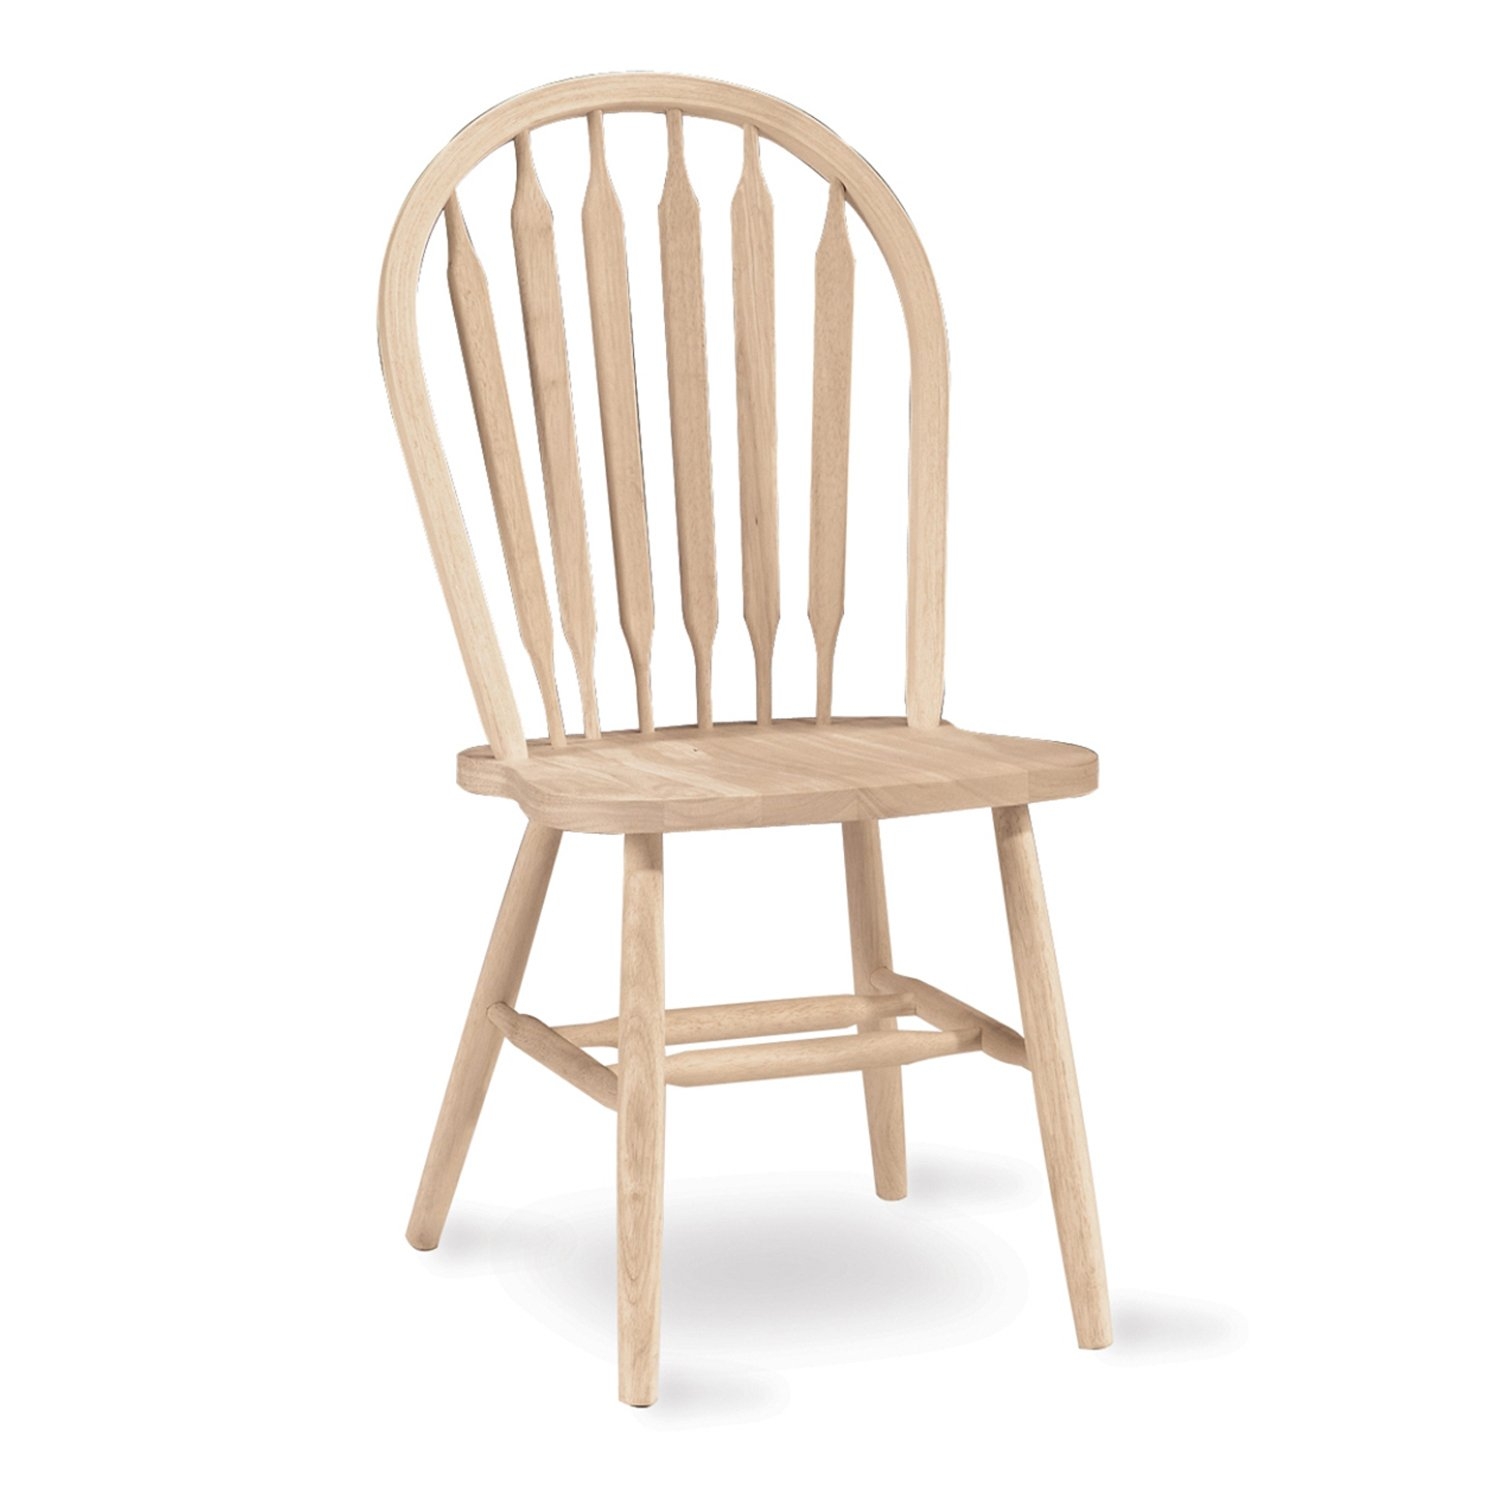 International Concepts 1C-113 37-Inch Arrow Back Chair, Unfinished